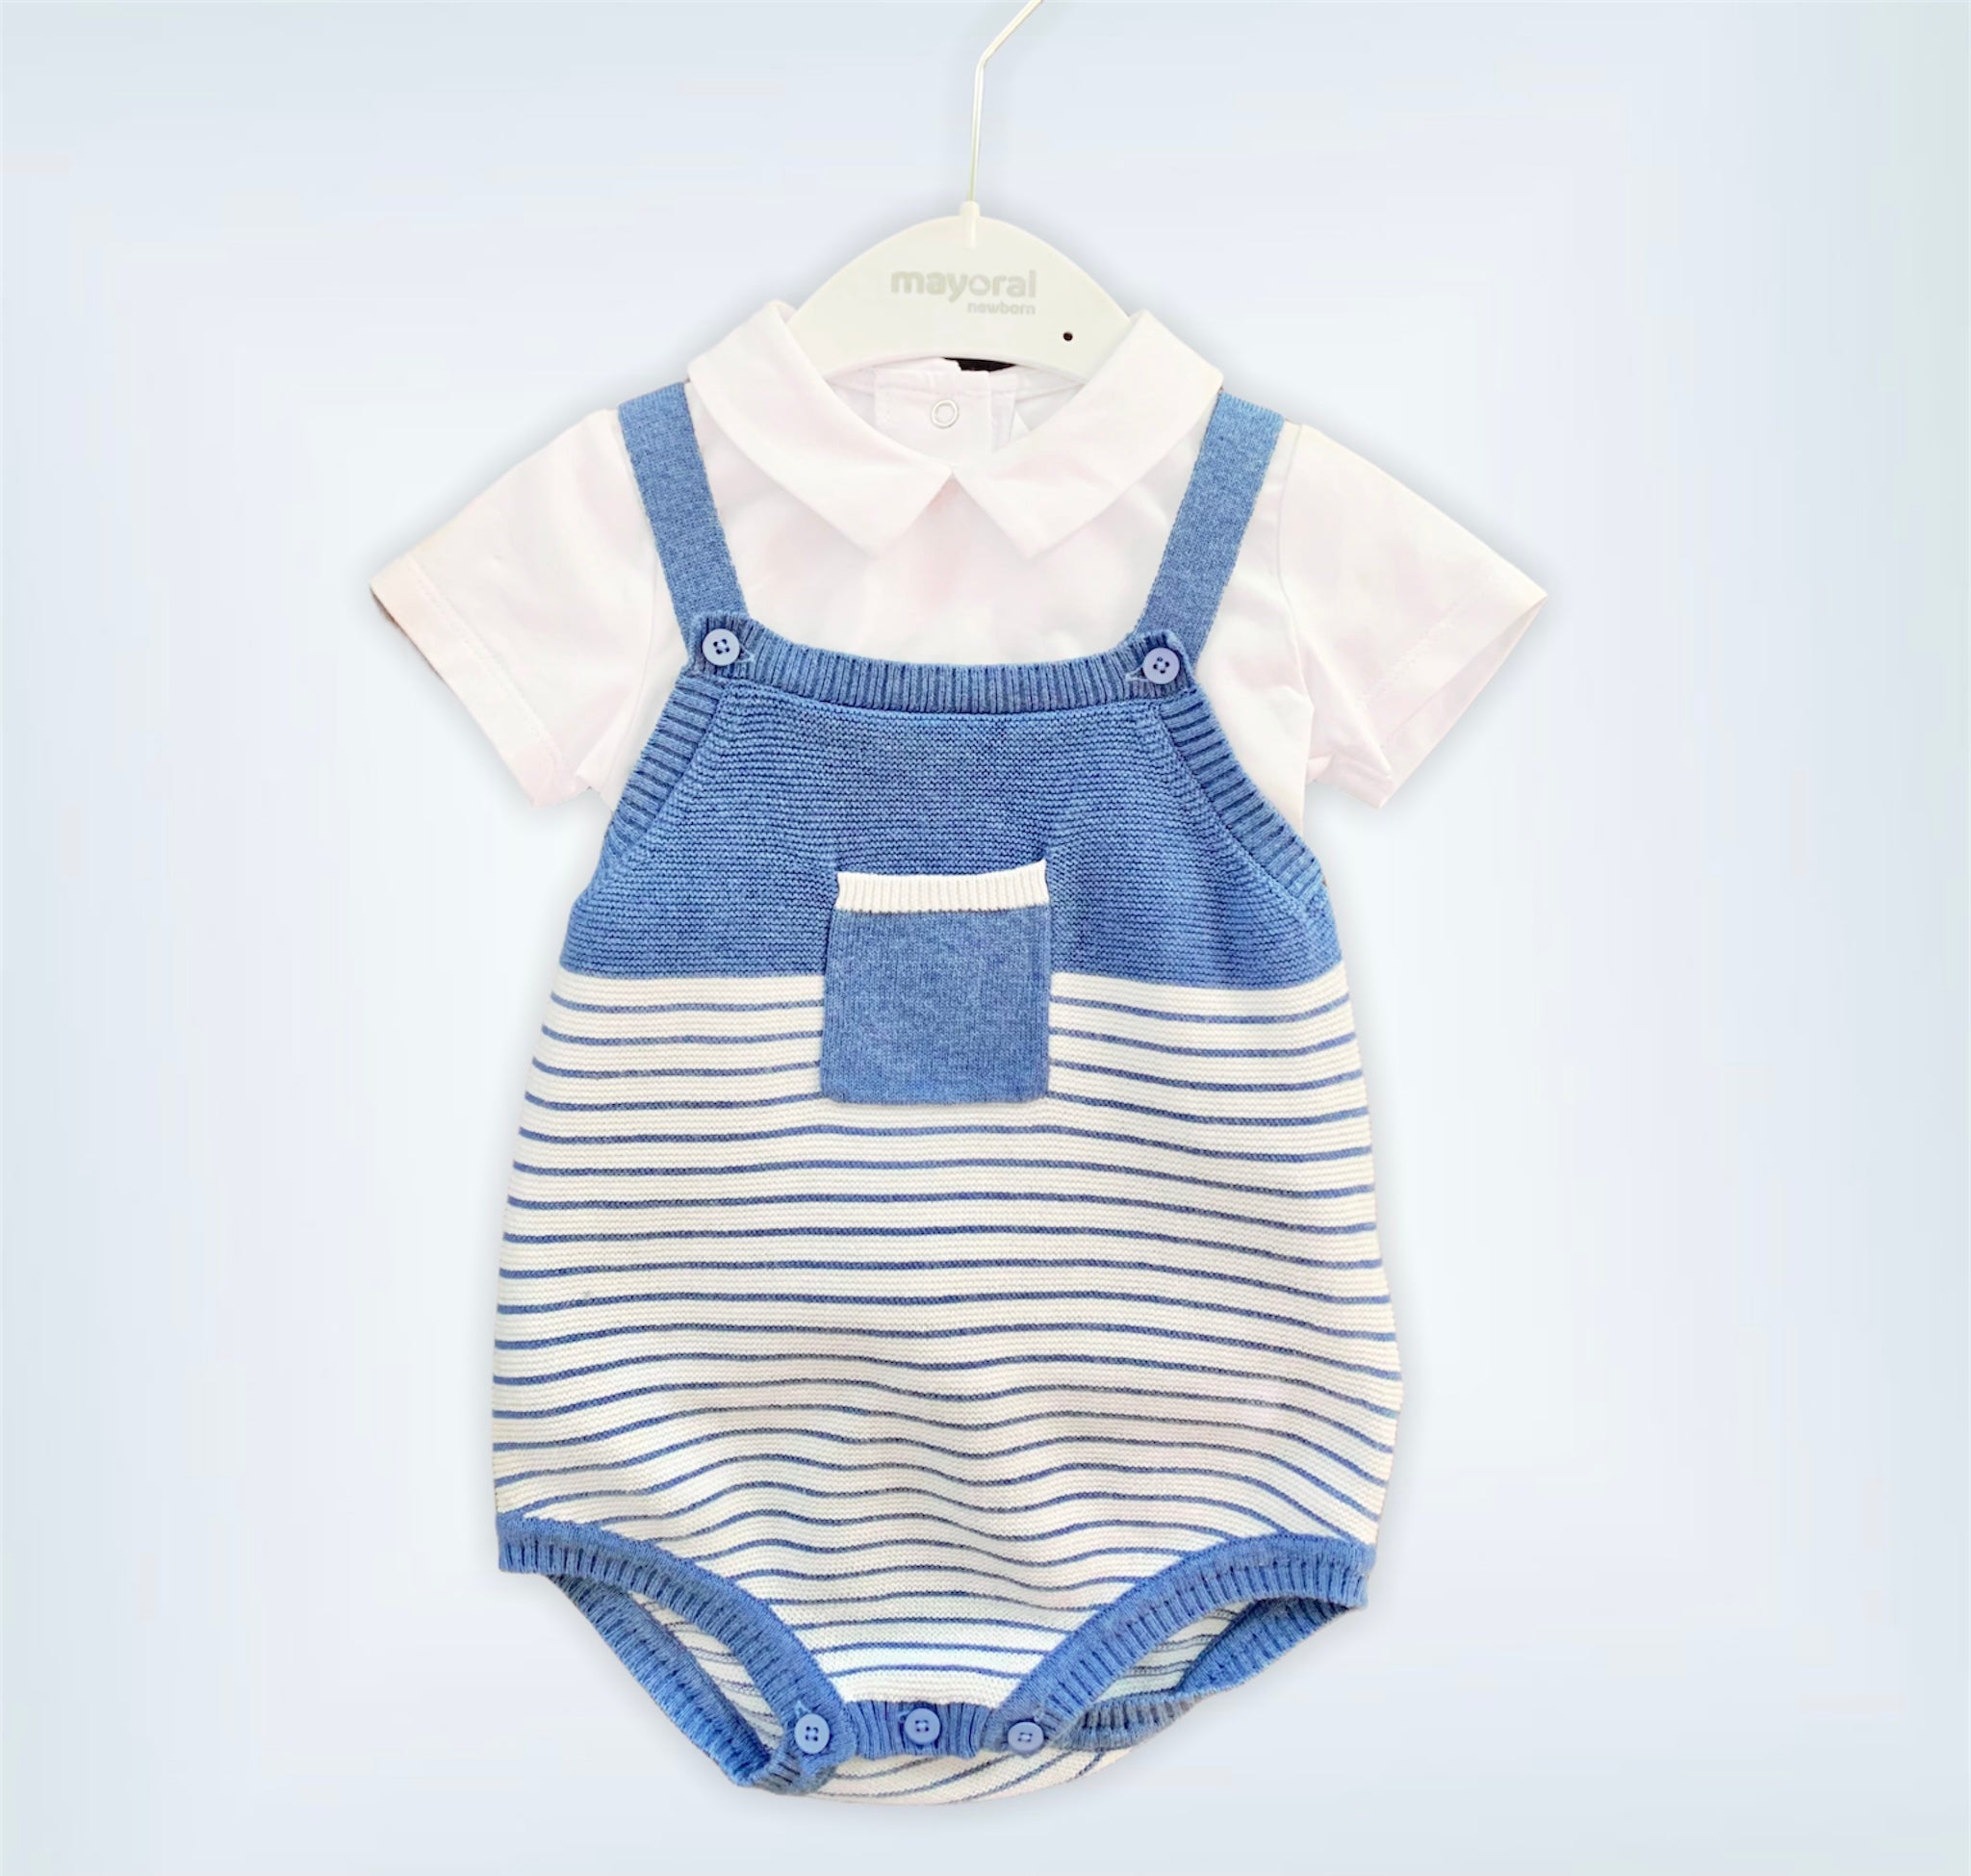 Blue Cotton Onesie Outfit